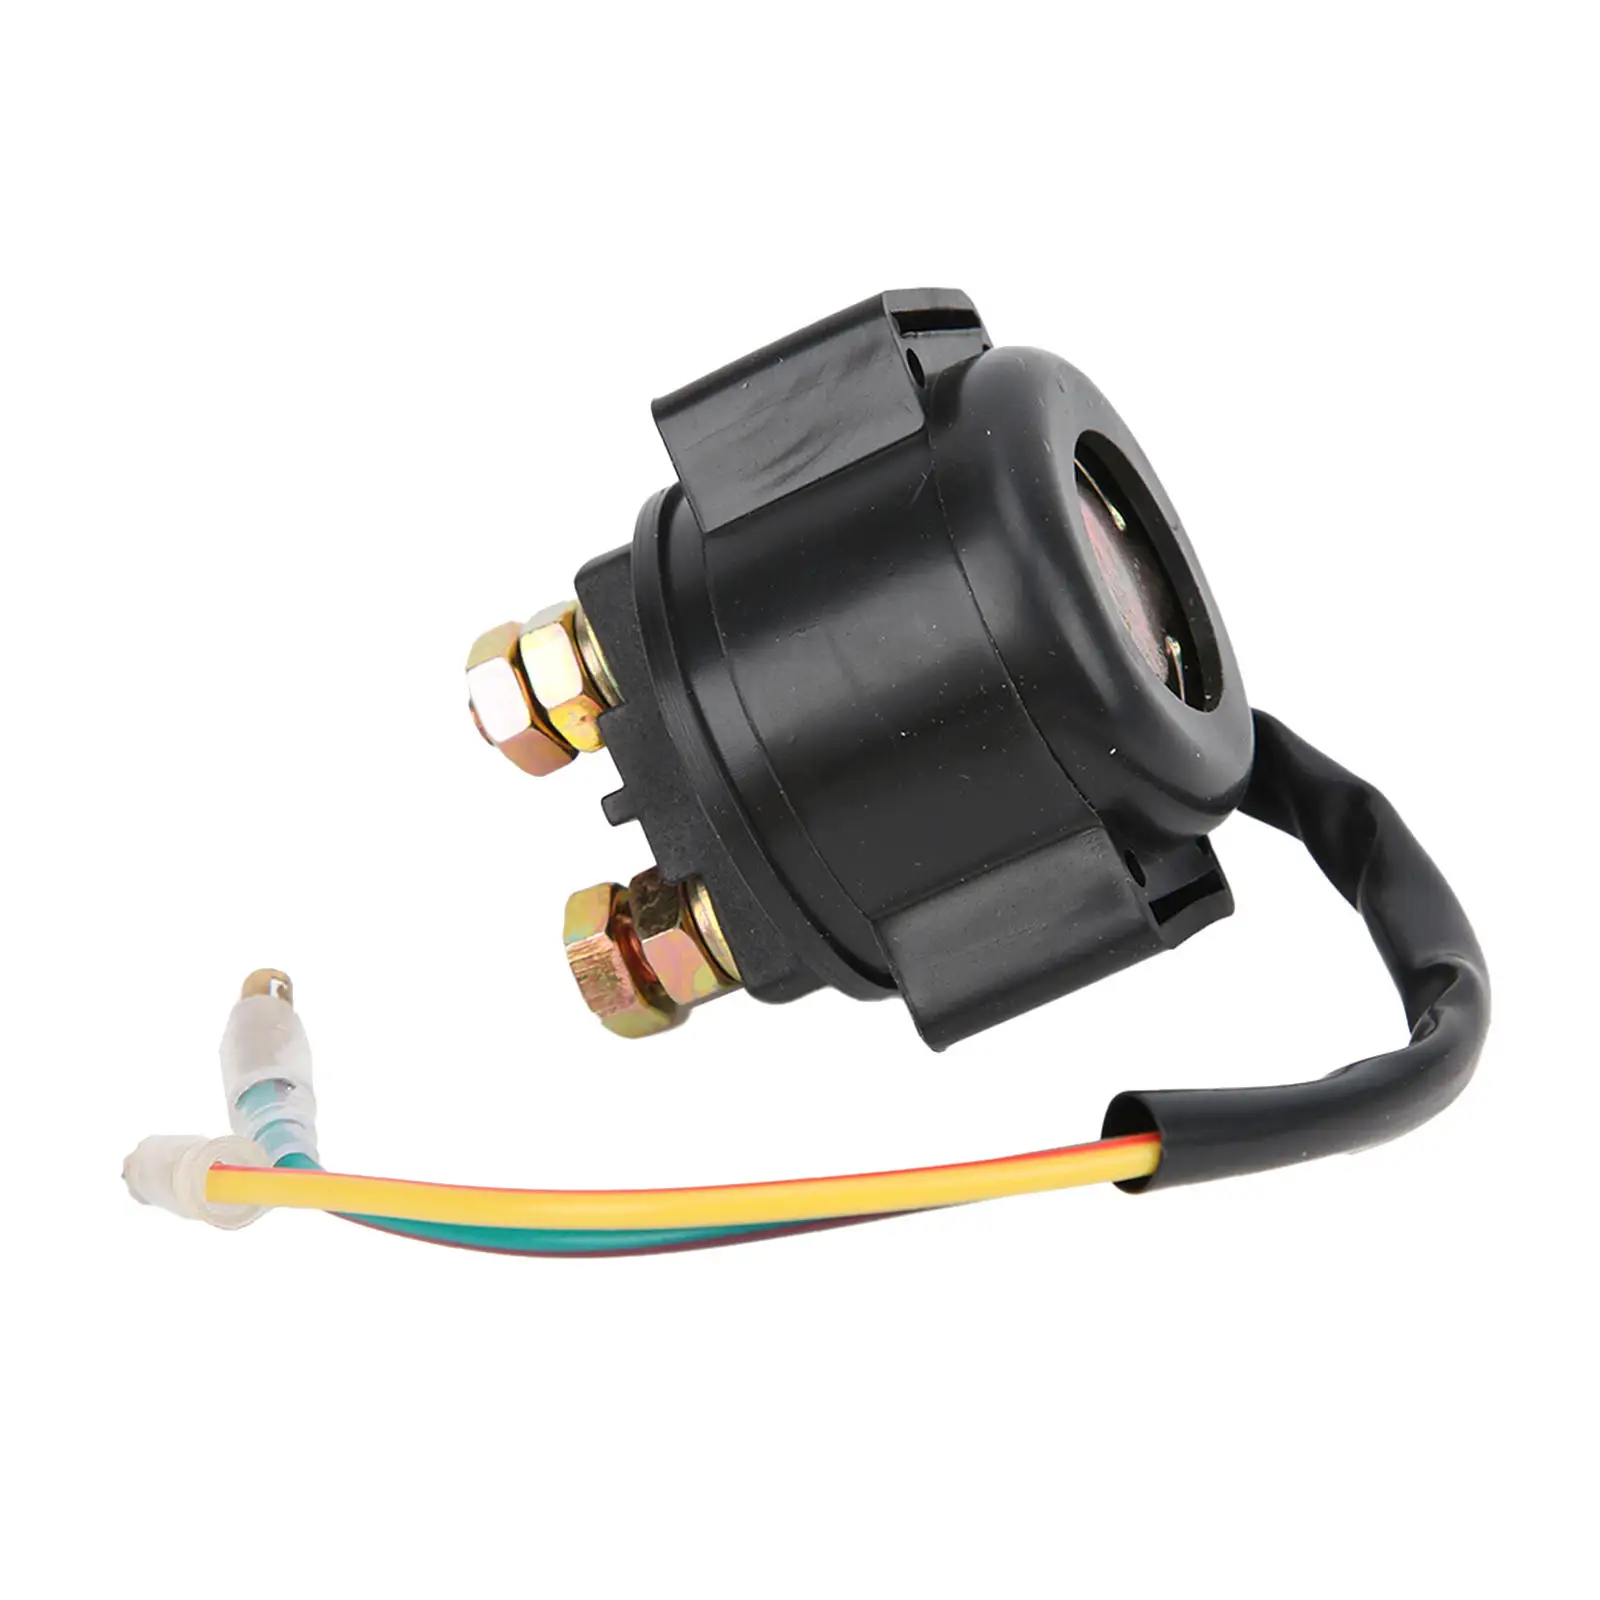 Motorcycle Relay Solenoid Supplies Accessories Durable Starter Solenoid Fit for Honda TRX400EX 1999-2004 2003 2004 for Fourtrax